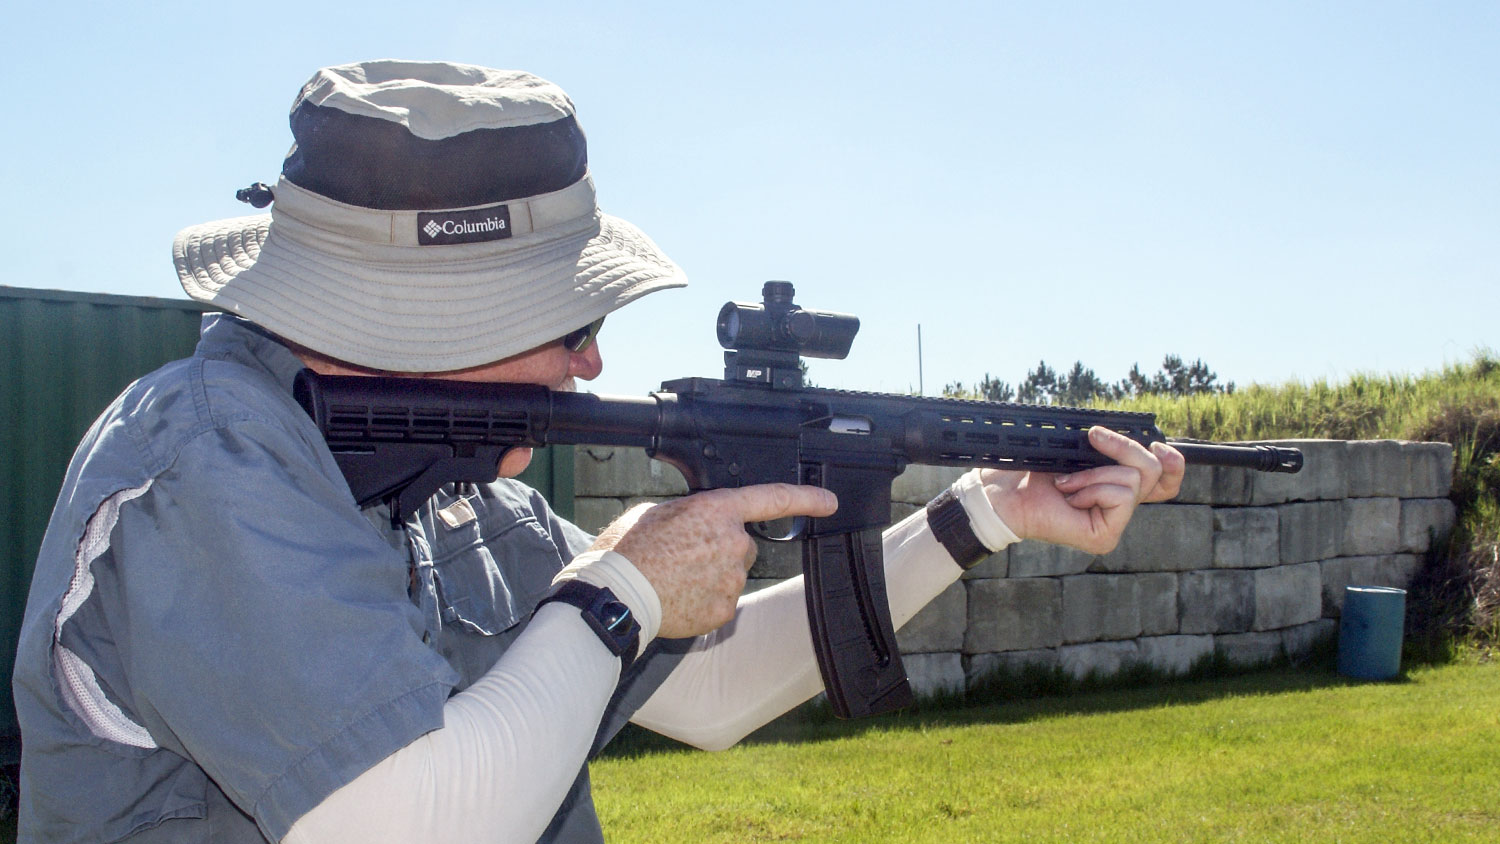 RFRO Grand Master Michael Hewitt works the M&amp;P 15-22 on steel targets.